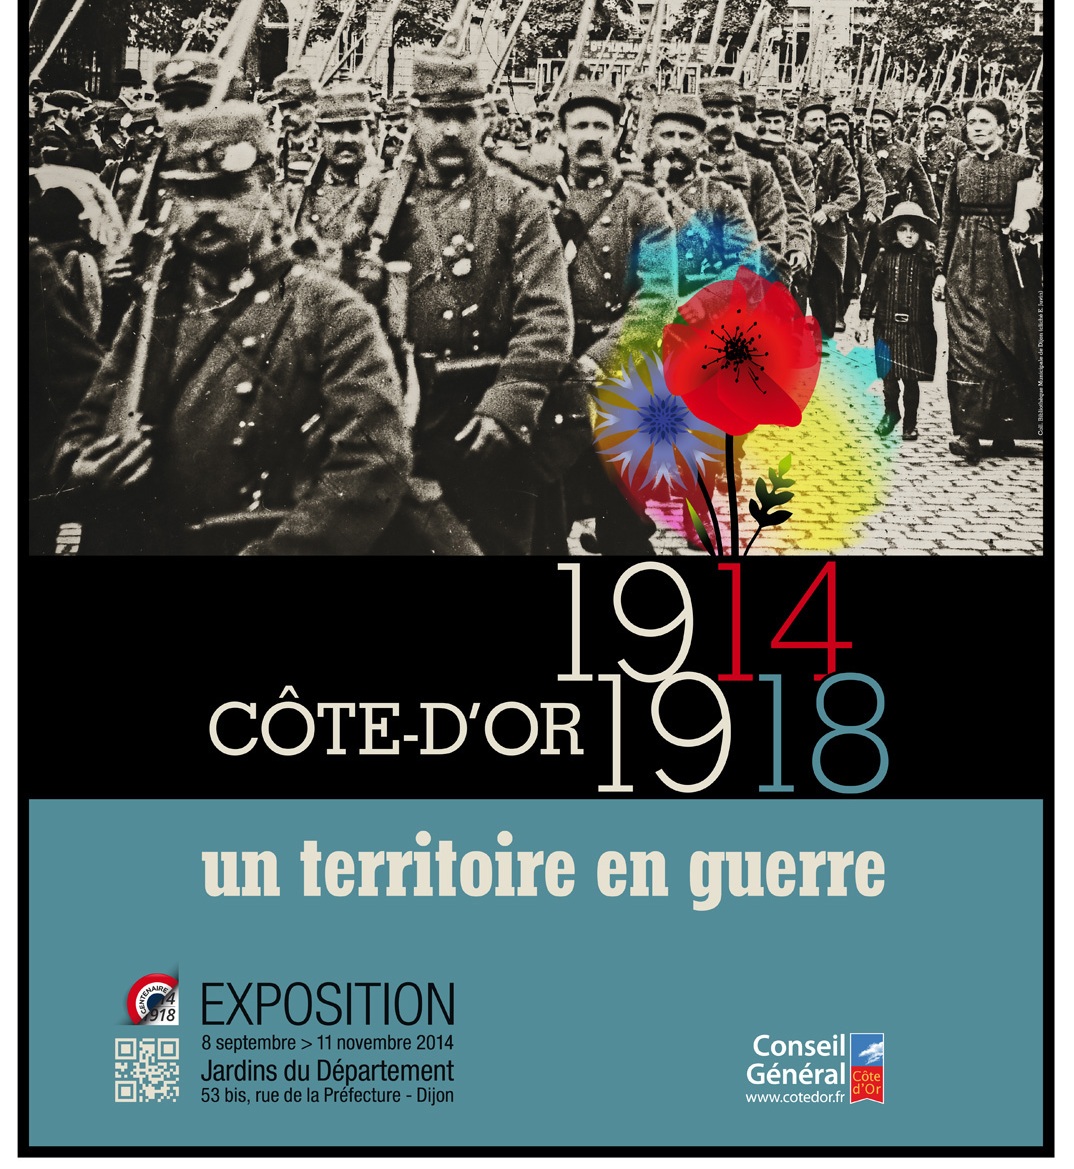 You are currently viewing Exposition  Côte d’Or,1914-1918 : Un territoire en guerre